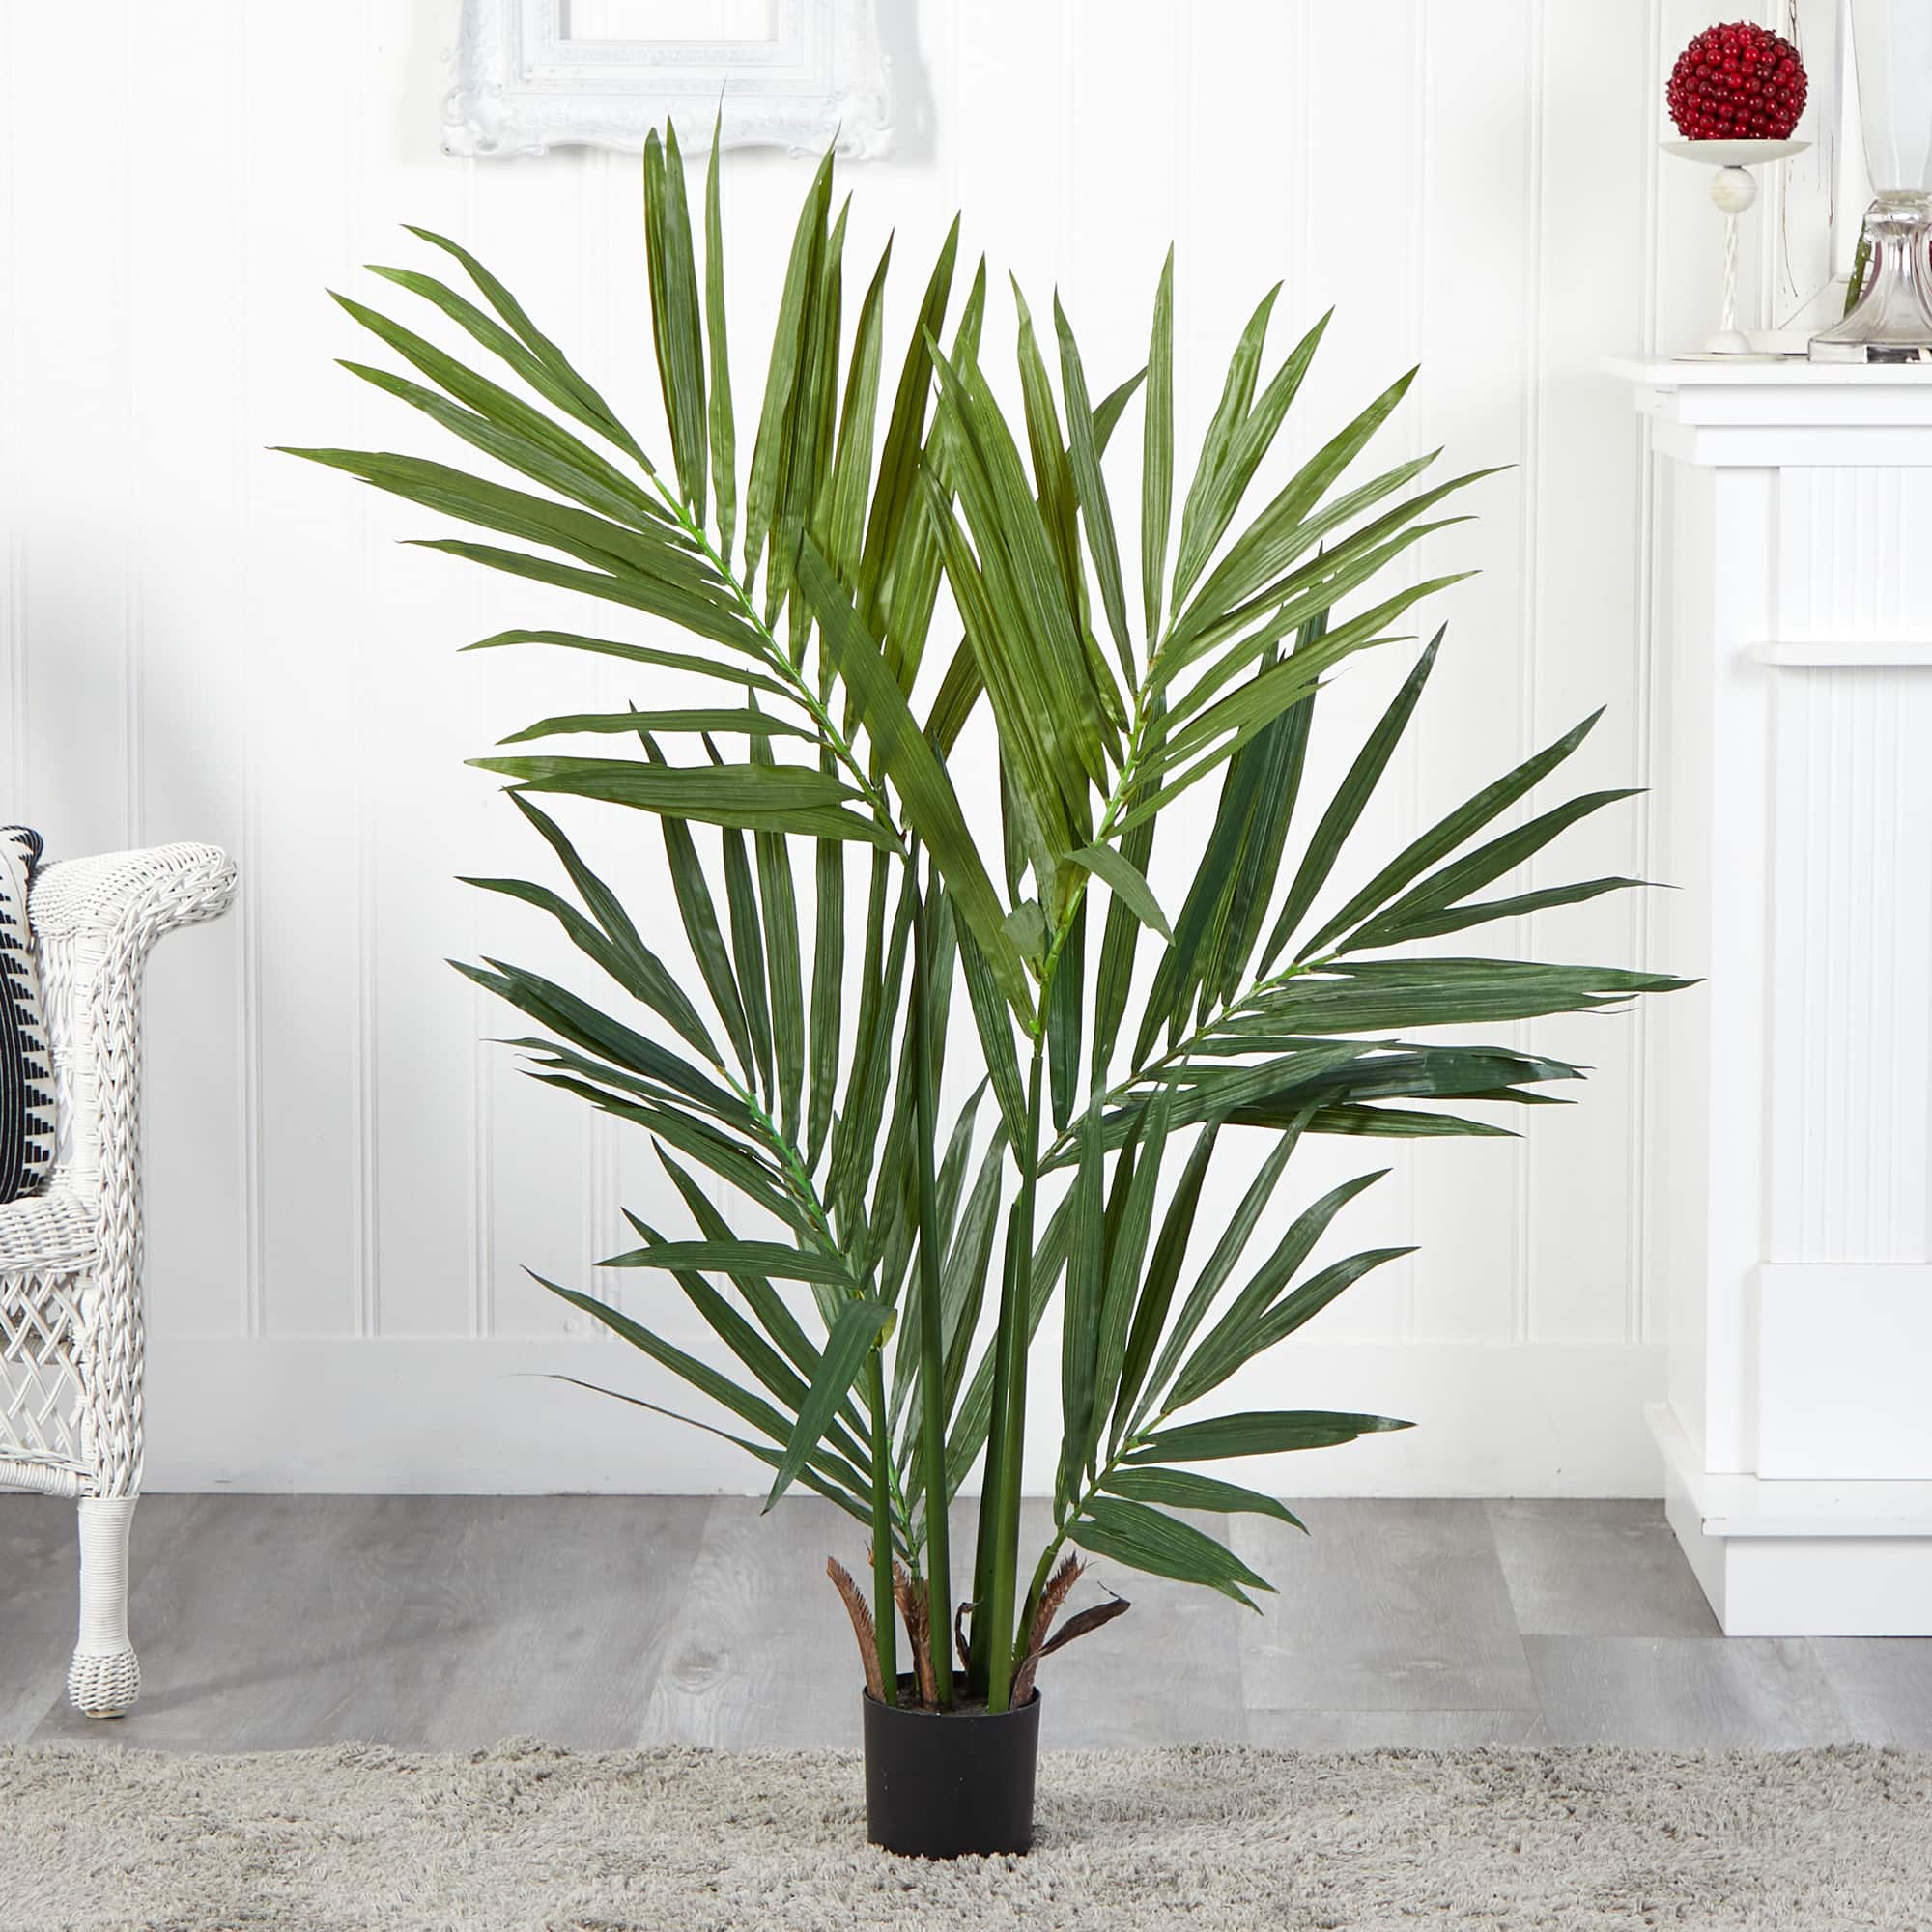 4ft. Potted Kentia Palm Silk Tree